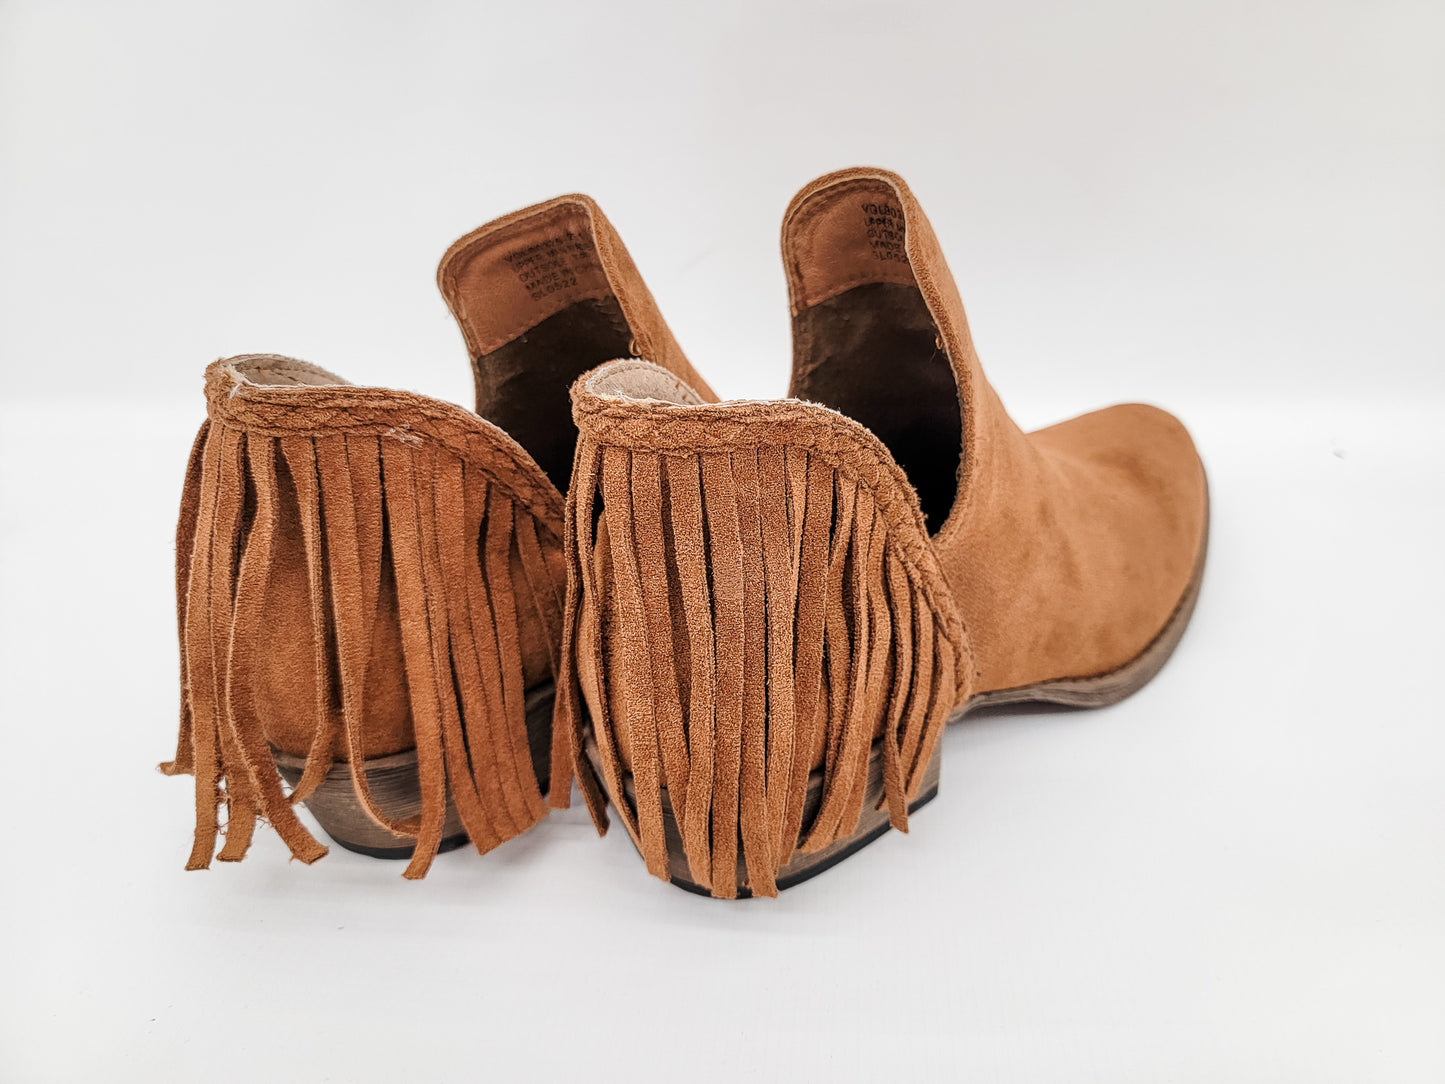 Very G Trio Tan Bootie with Fringe